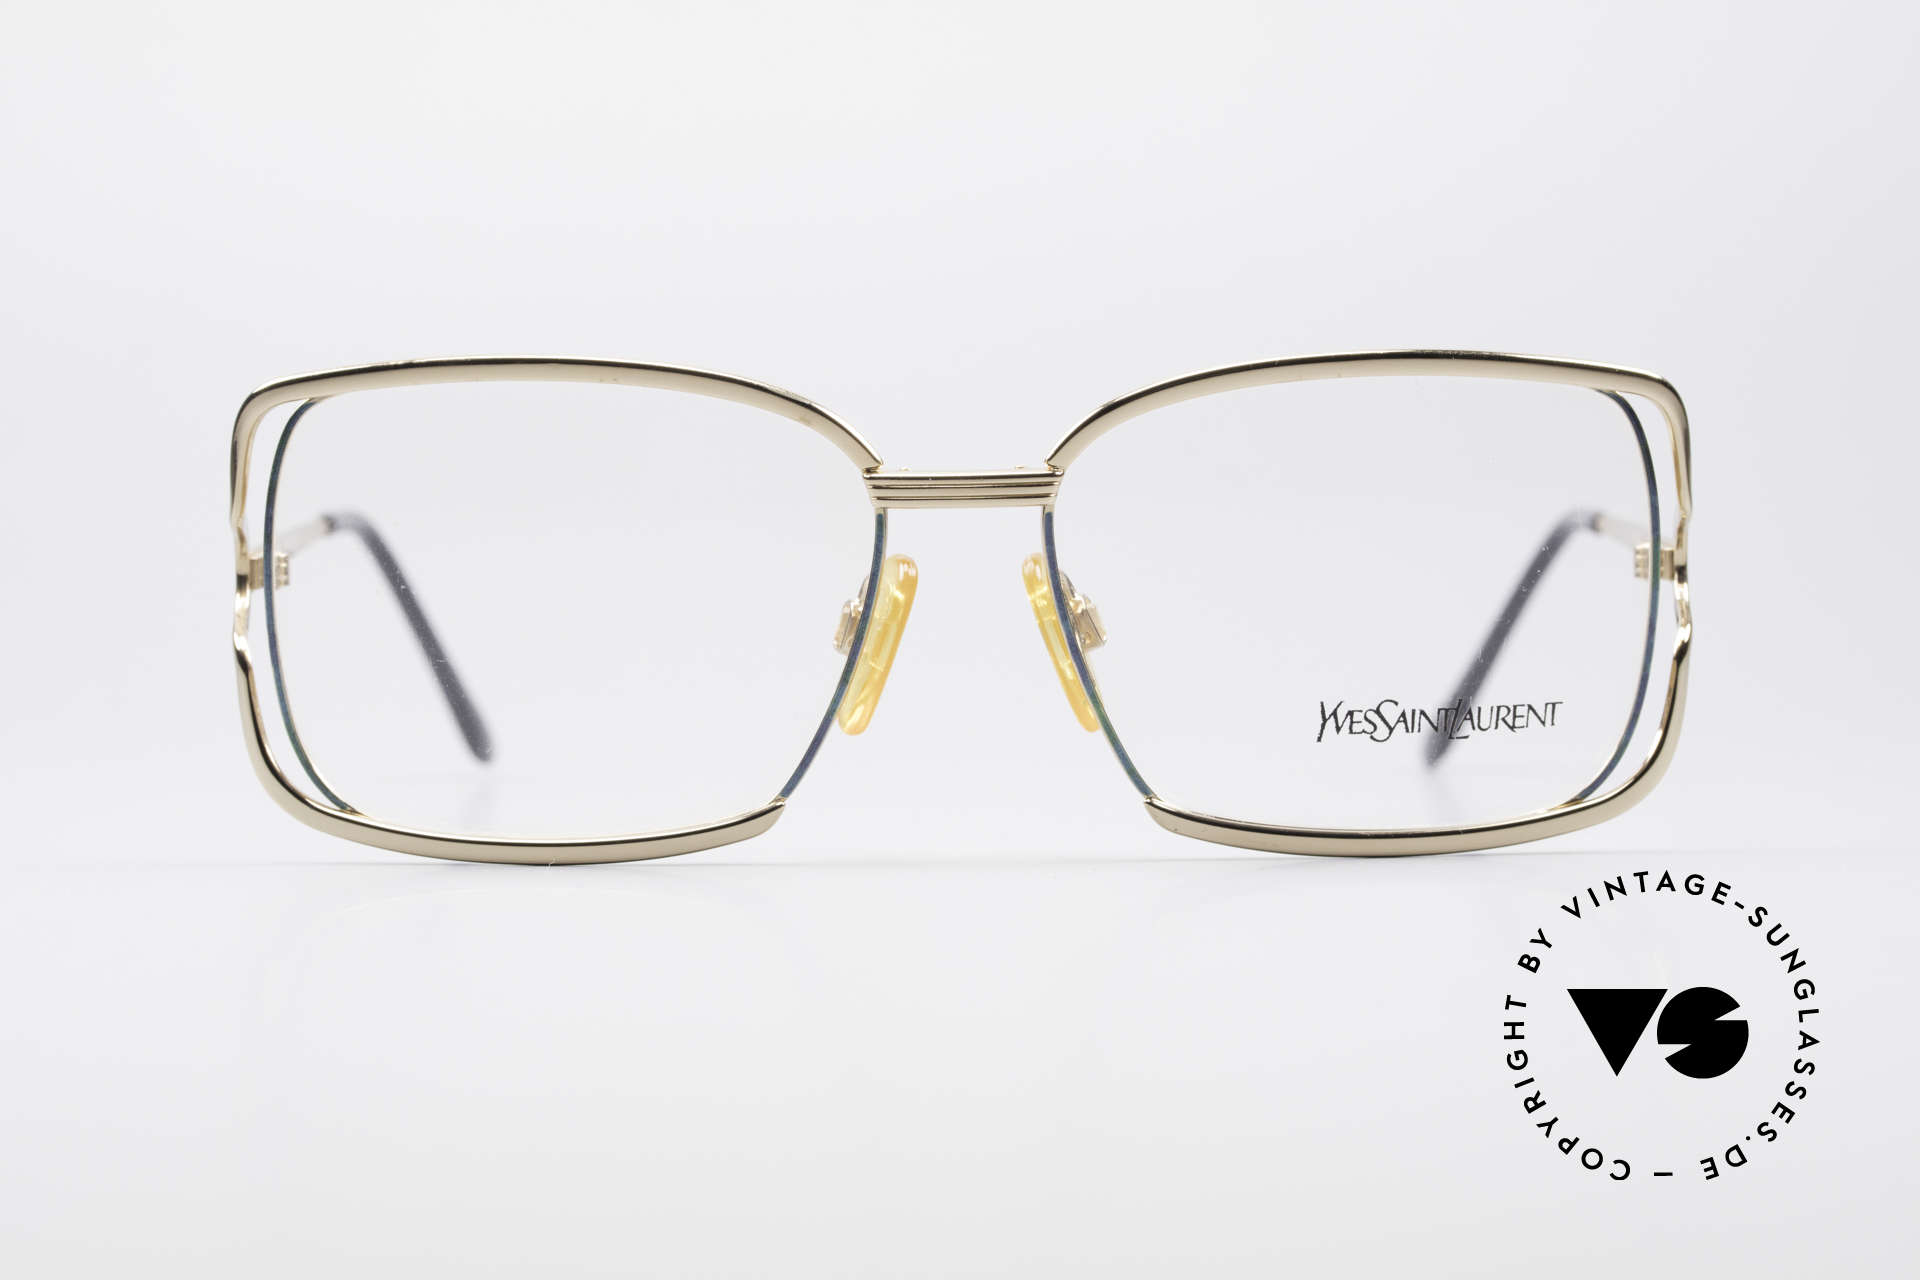 Yves Saint Laurent 4046 Vintage Ladies Eyeglasses, by the famous style icon: Yves Saint LAURENT, Made for Women